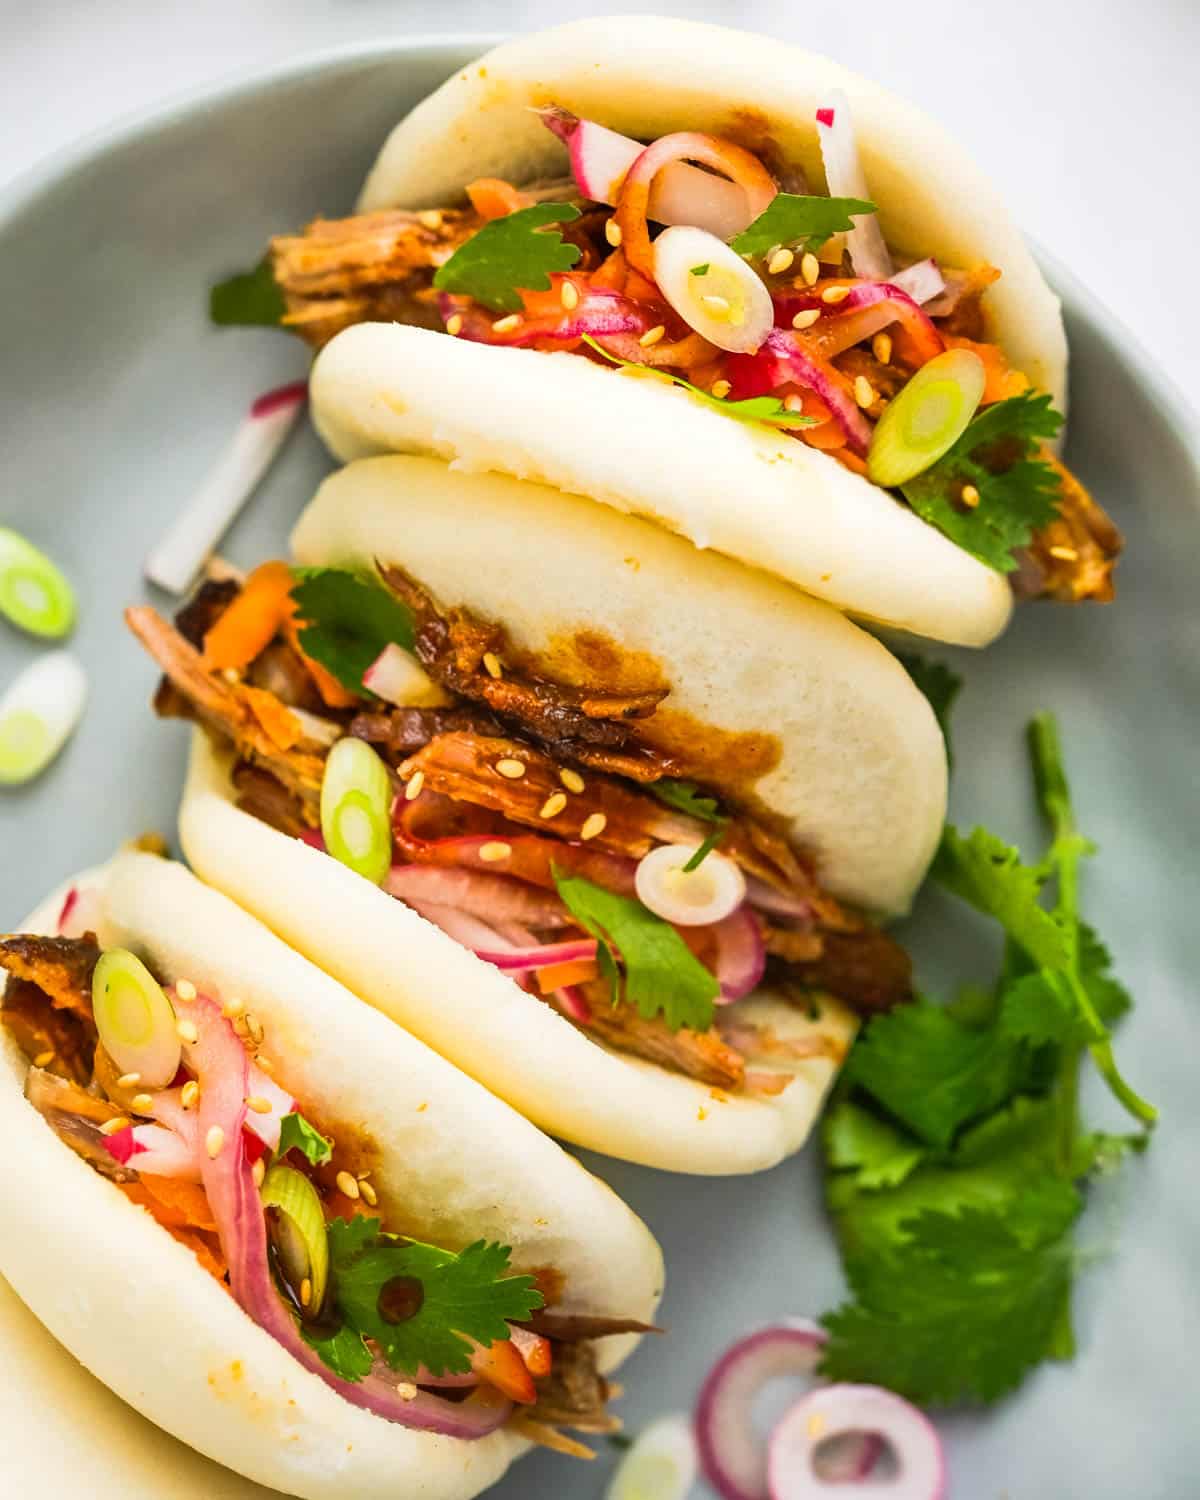 A plate of BBQ pork bao buns with toppings.